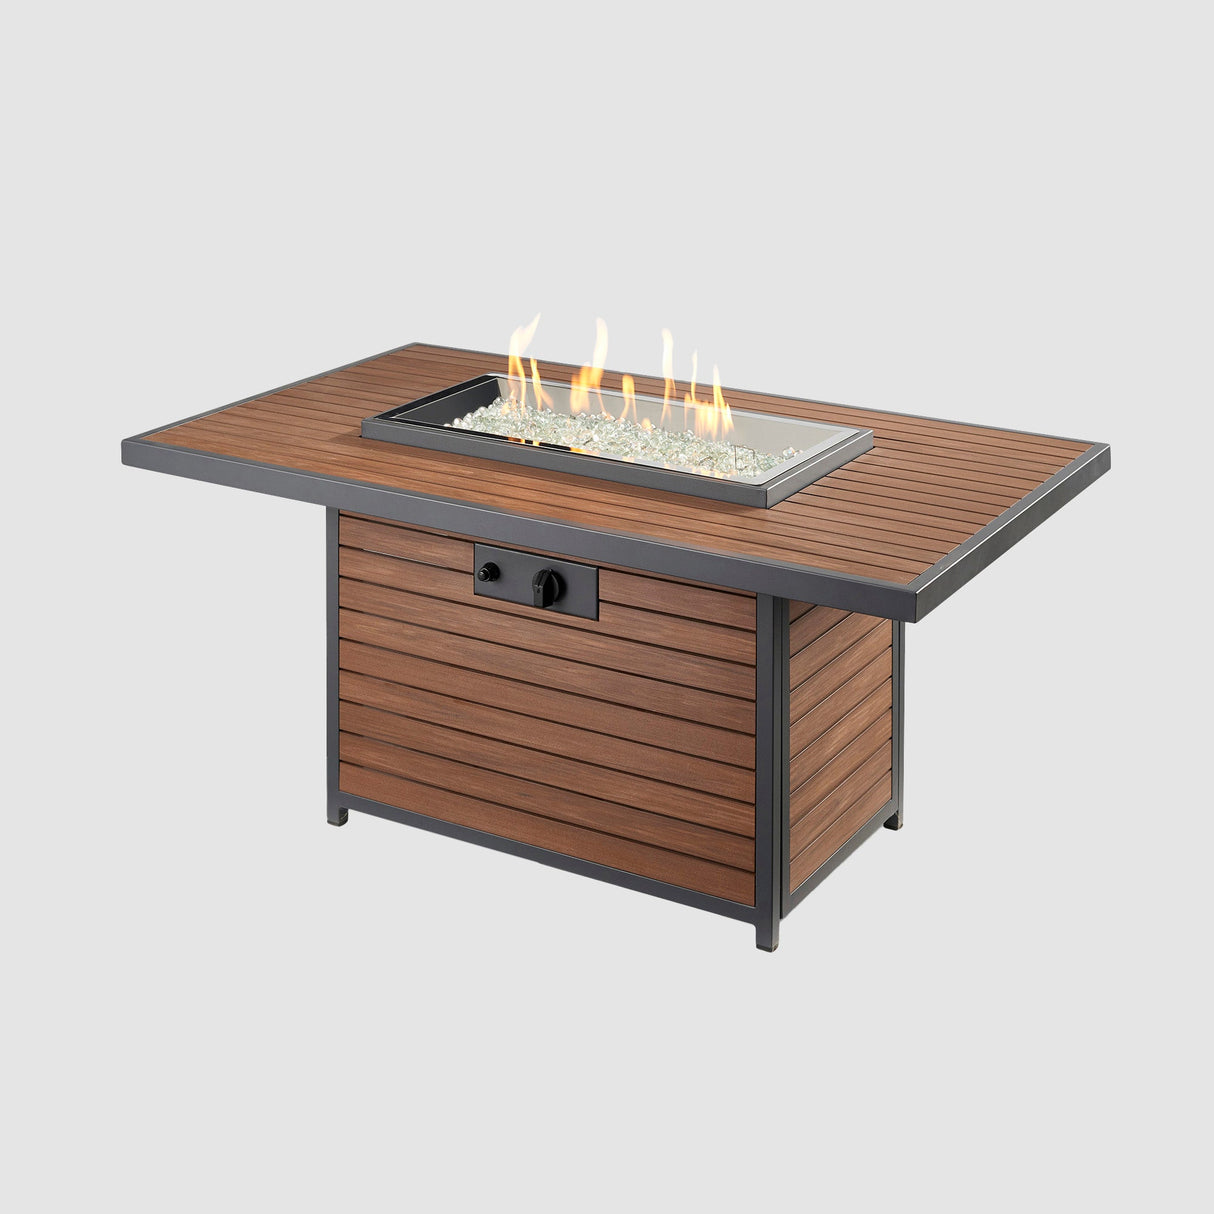 Kenwood Rectangular Chat Height Gas Fire Pit Table on a grey background